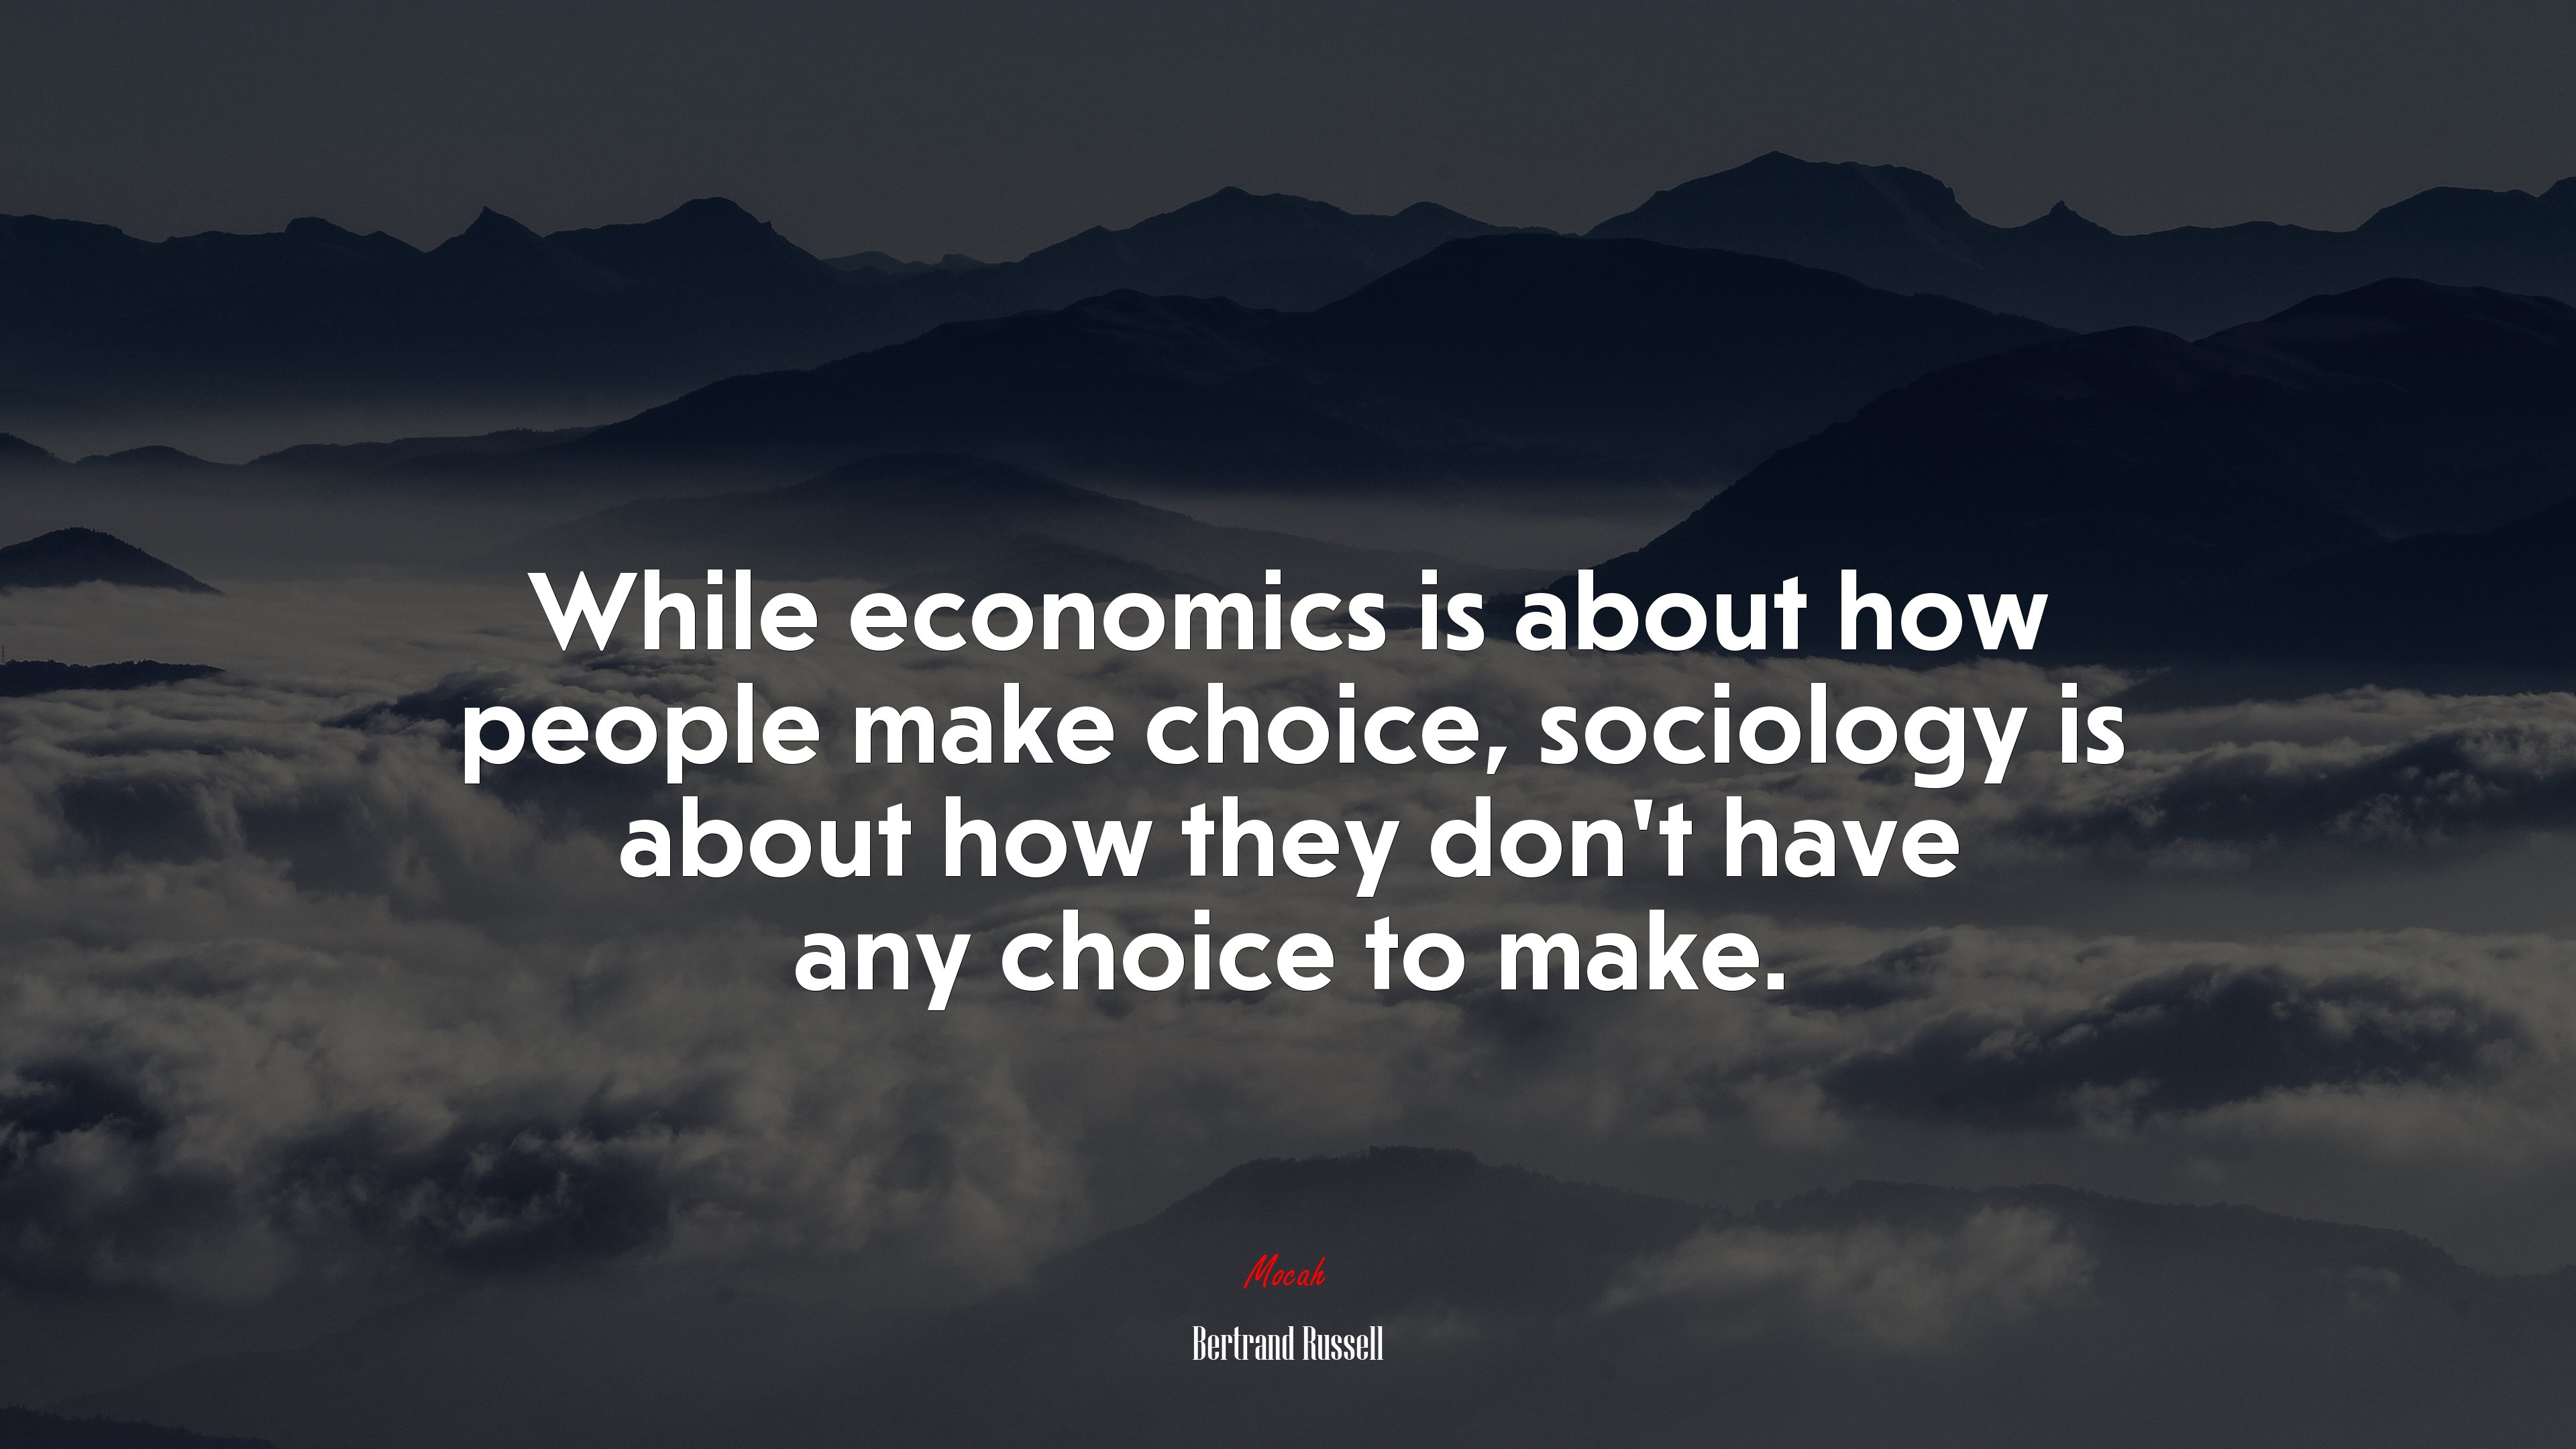 While economics is about how people make choice sociology is about how they dont have any choice to make bertrand russell quote